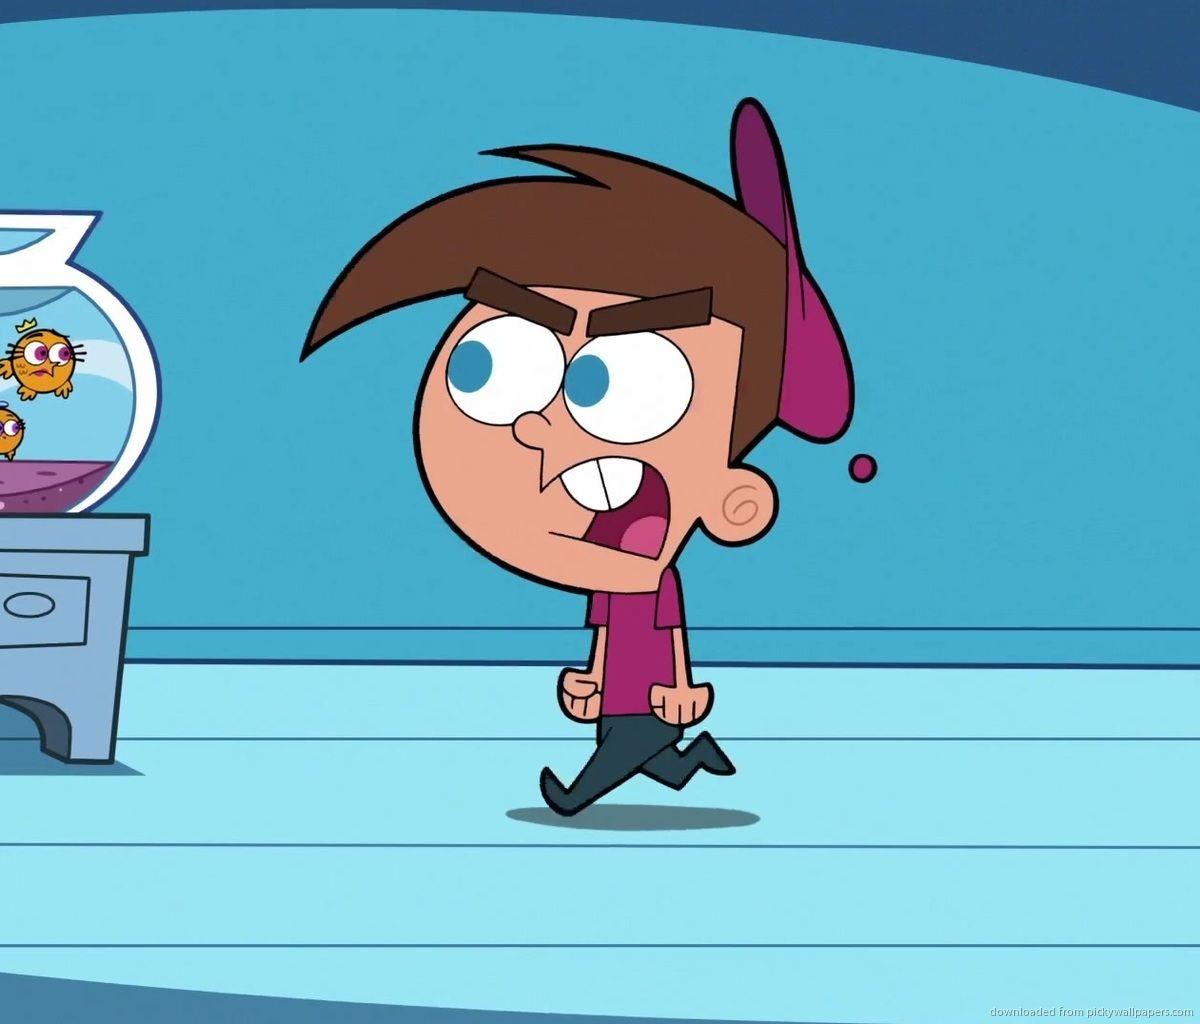 Image result for fairly odd parents timmy. iPhone wallpaper